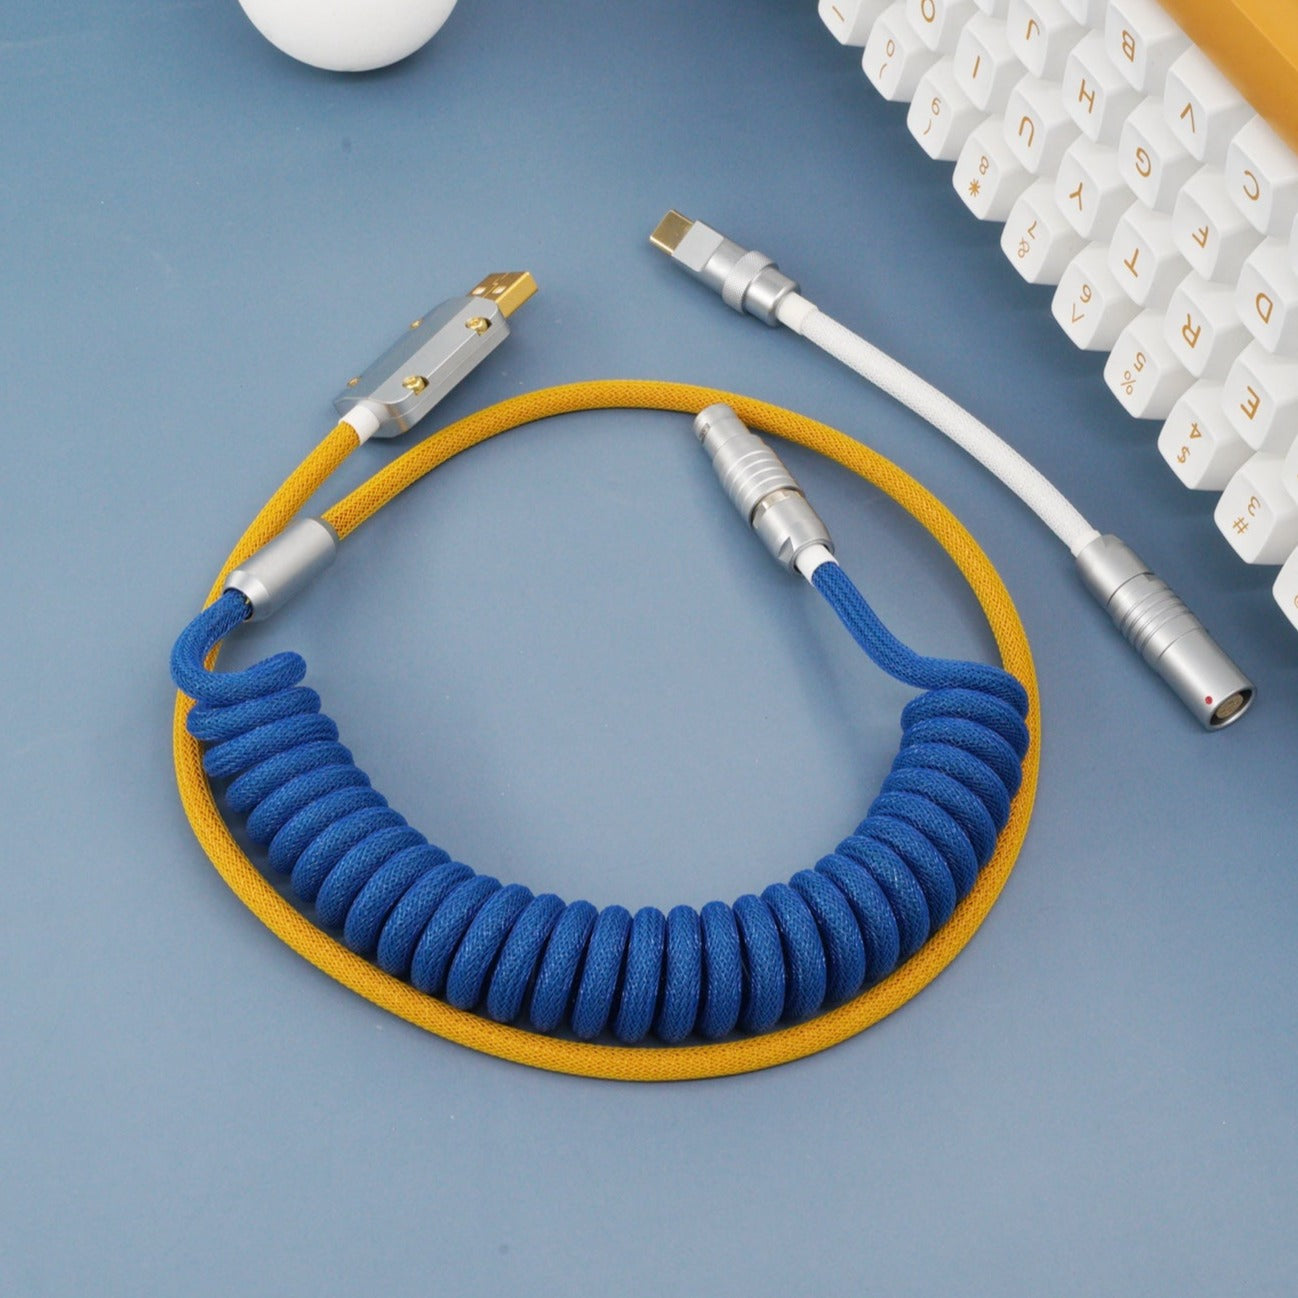 Sleeved Coiled Keyboard Aviator Cable, Lemo Style Connector - Blue/Gold/White